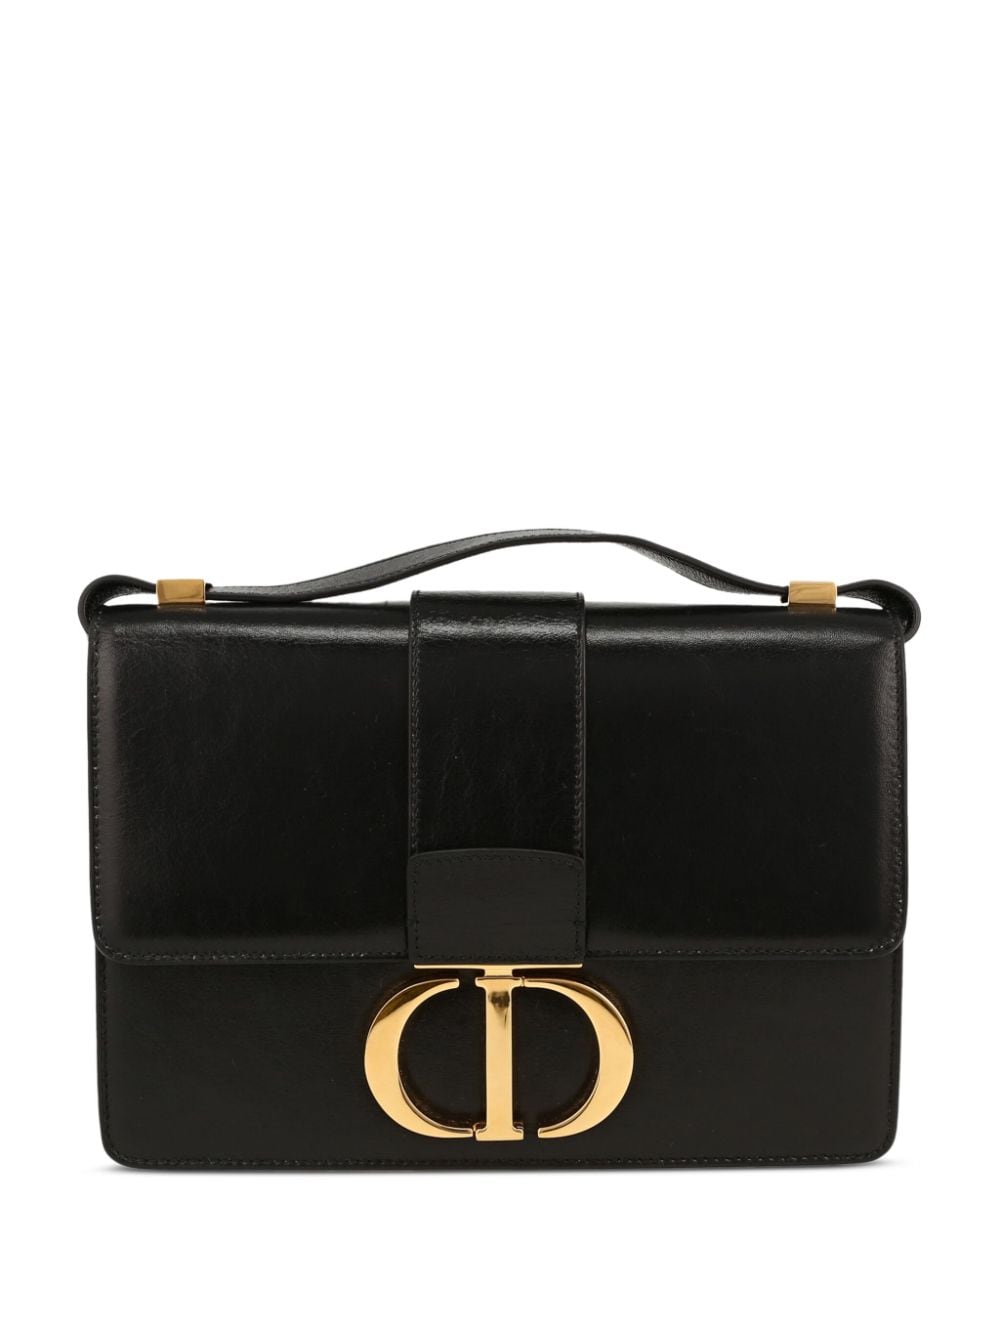 Christian Dior Pre-Owned 2020 30 Montaigne shoulder bag - Black von Christian Dior Pre-Owned